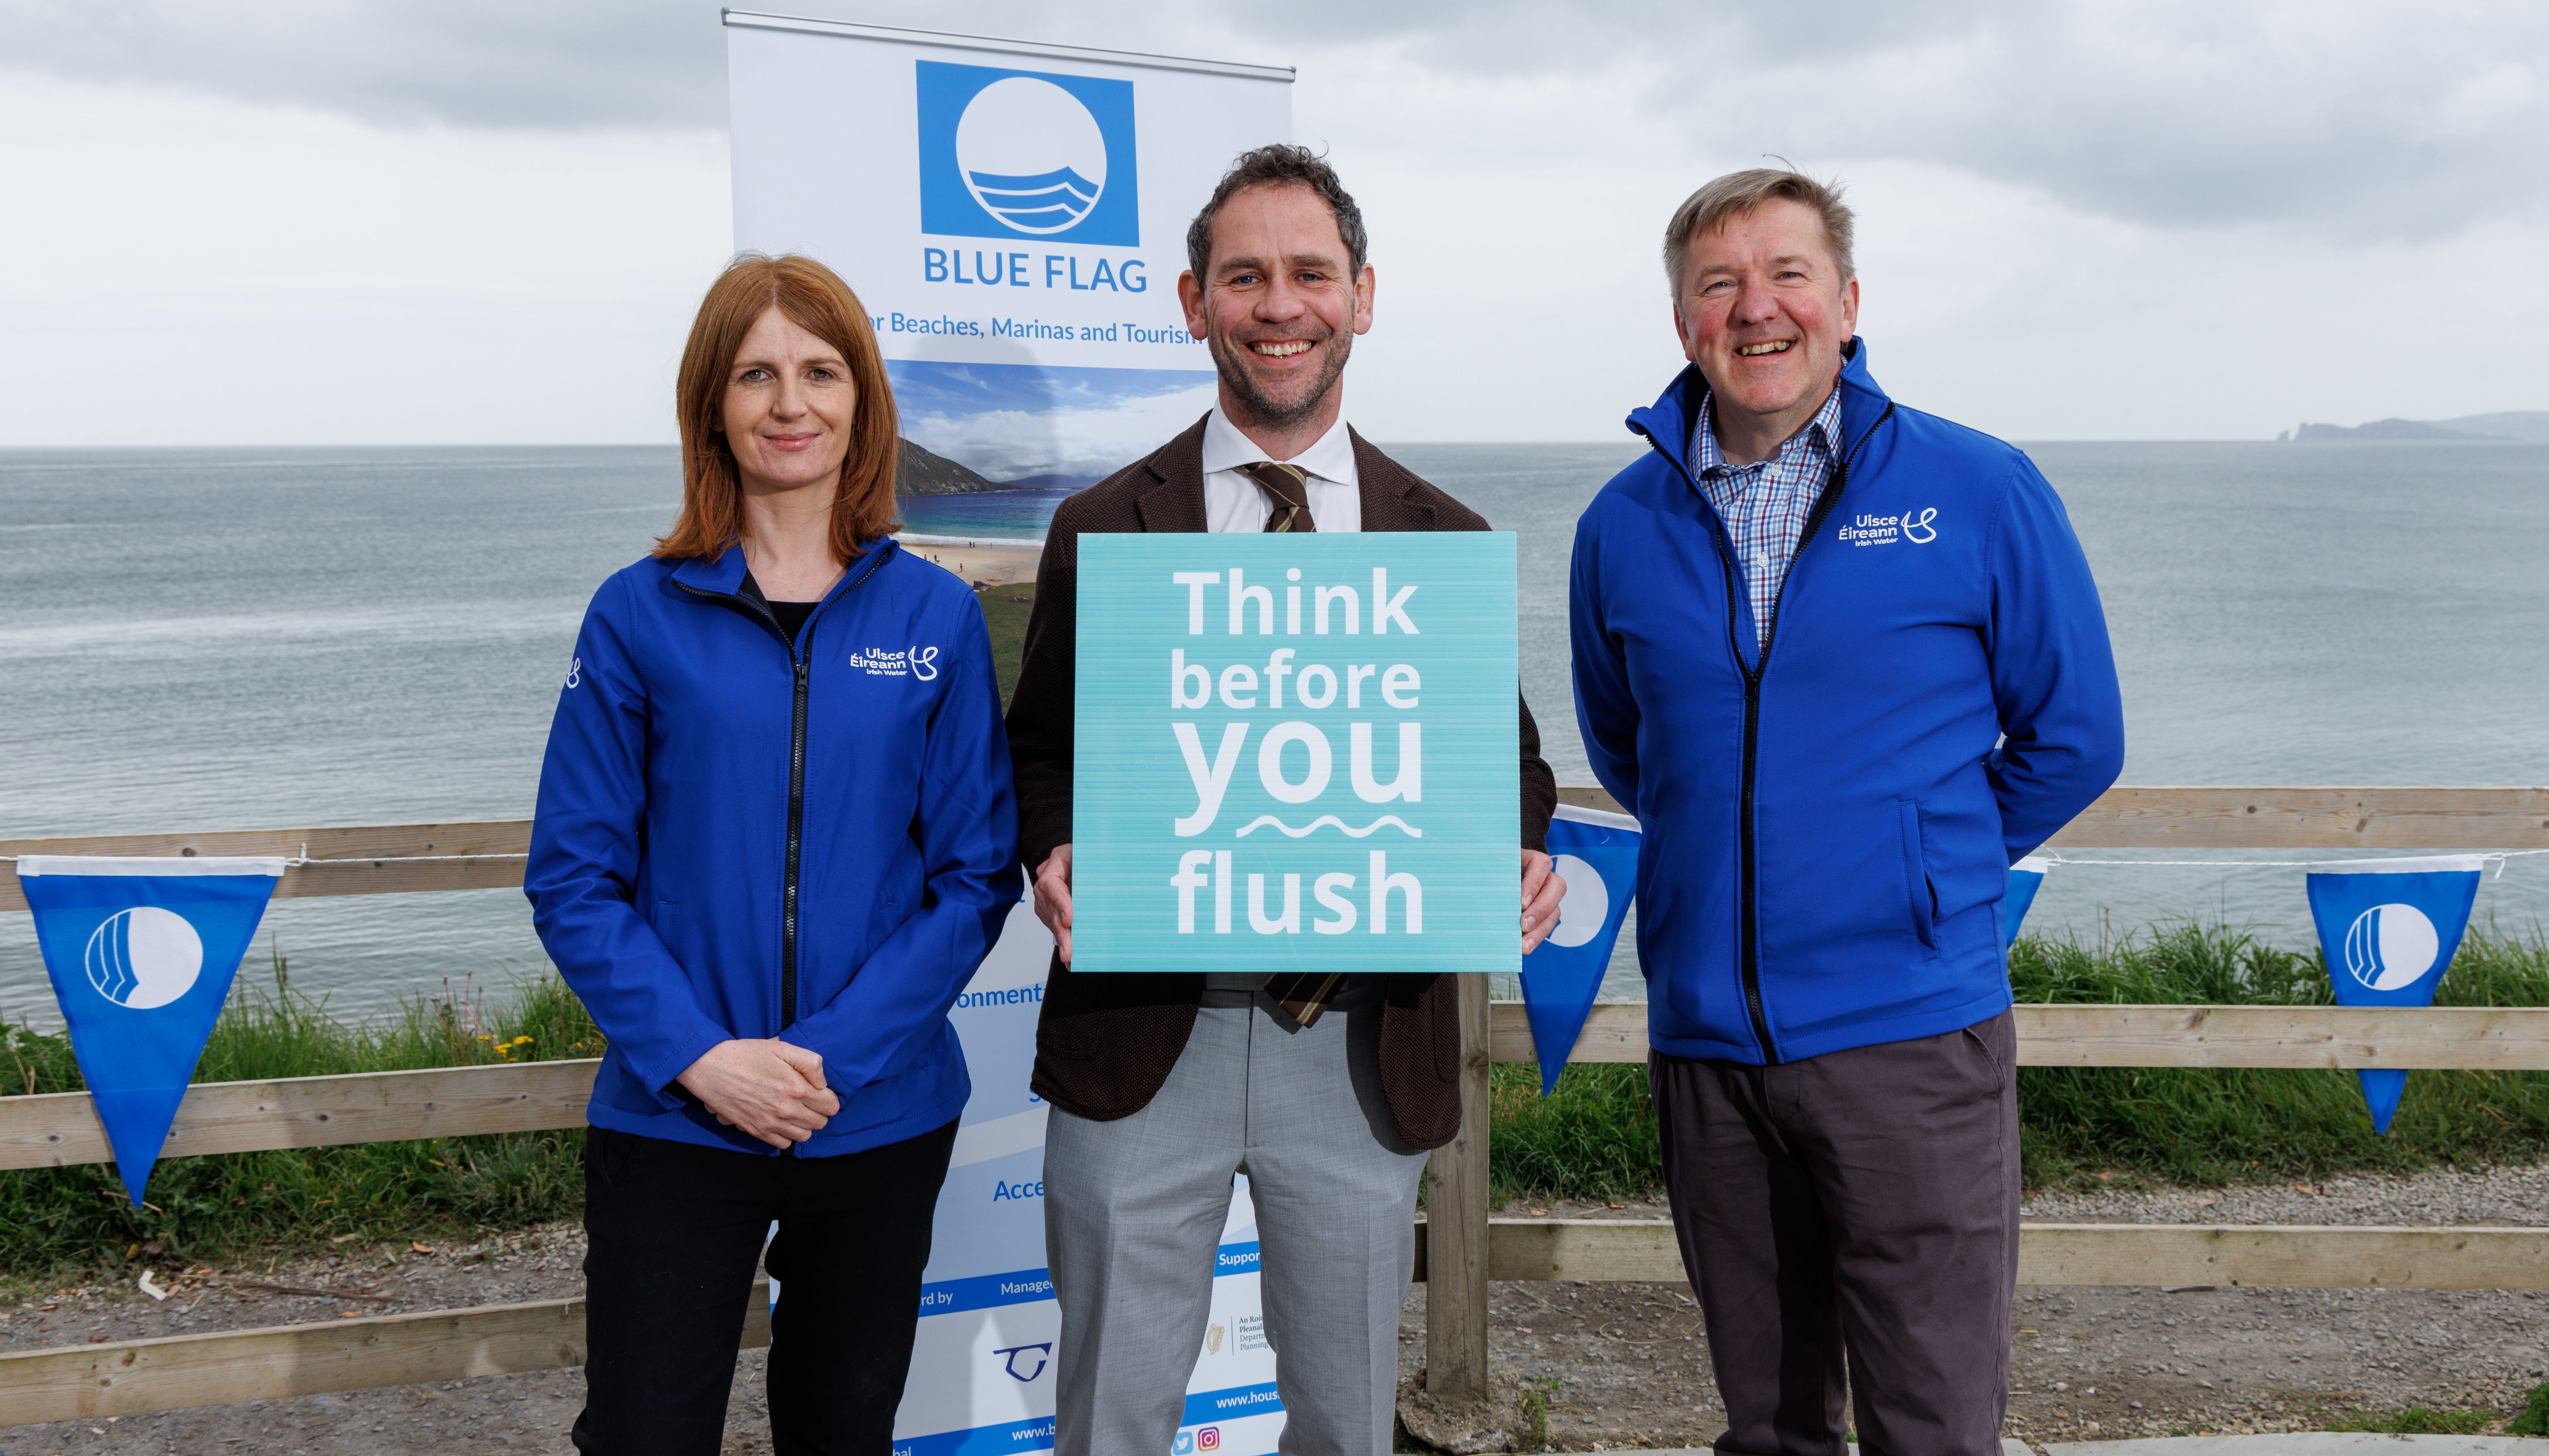 Read Local councils Unite to Keep Our Coastline Fresh and Flush-Free! by Clean Coasts